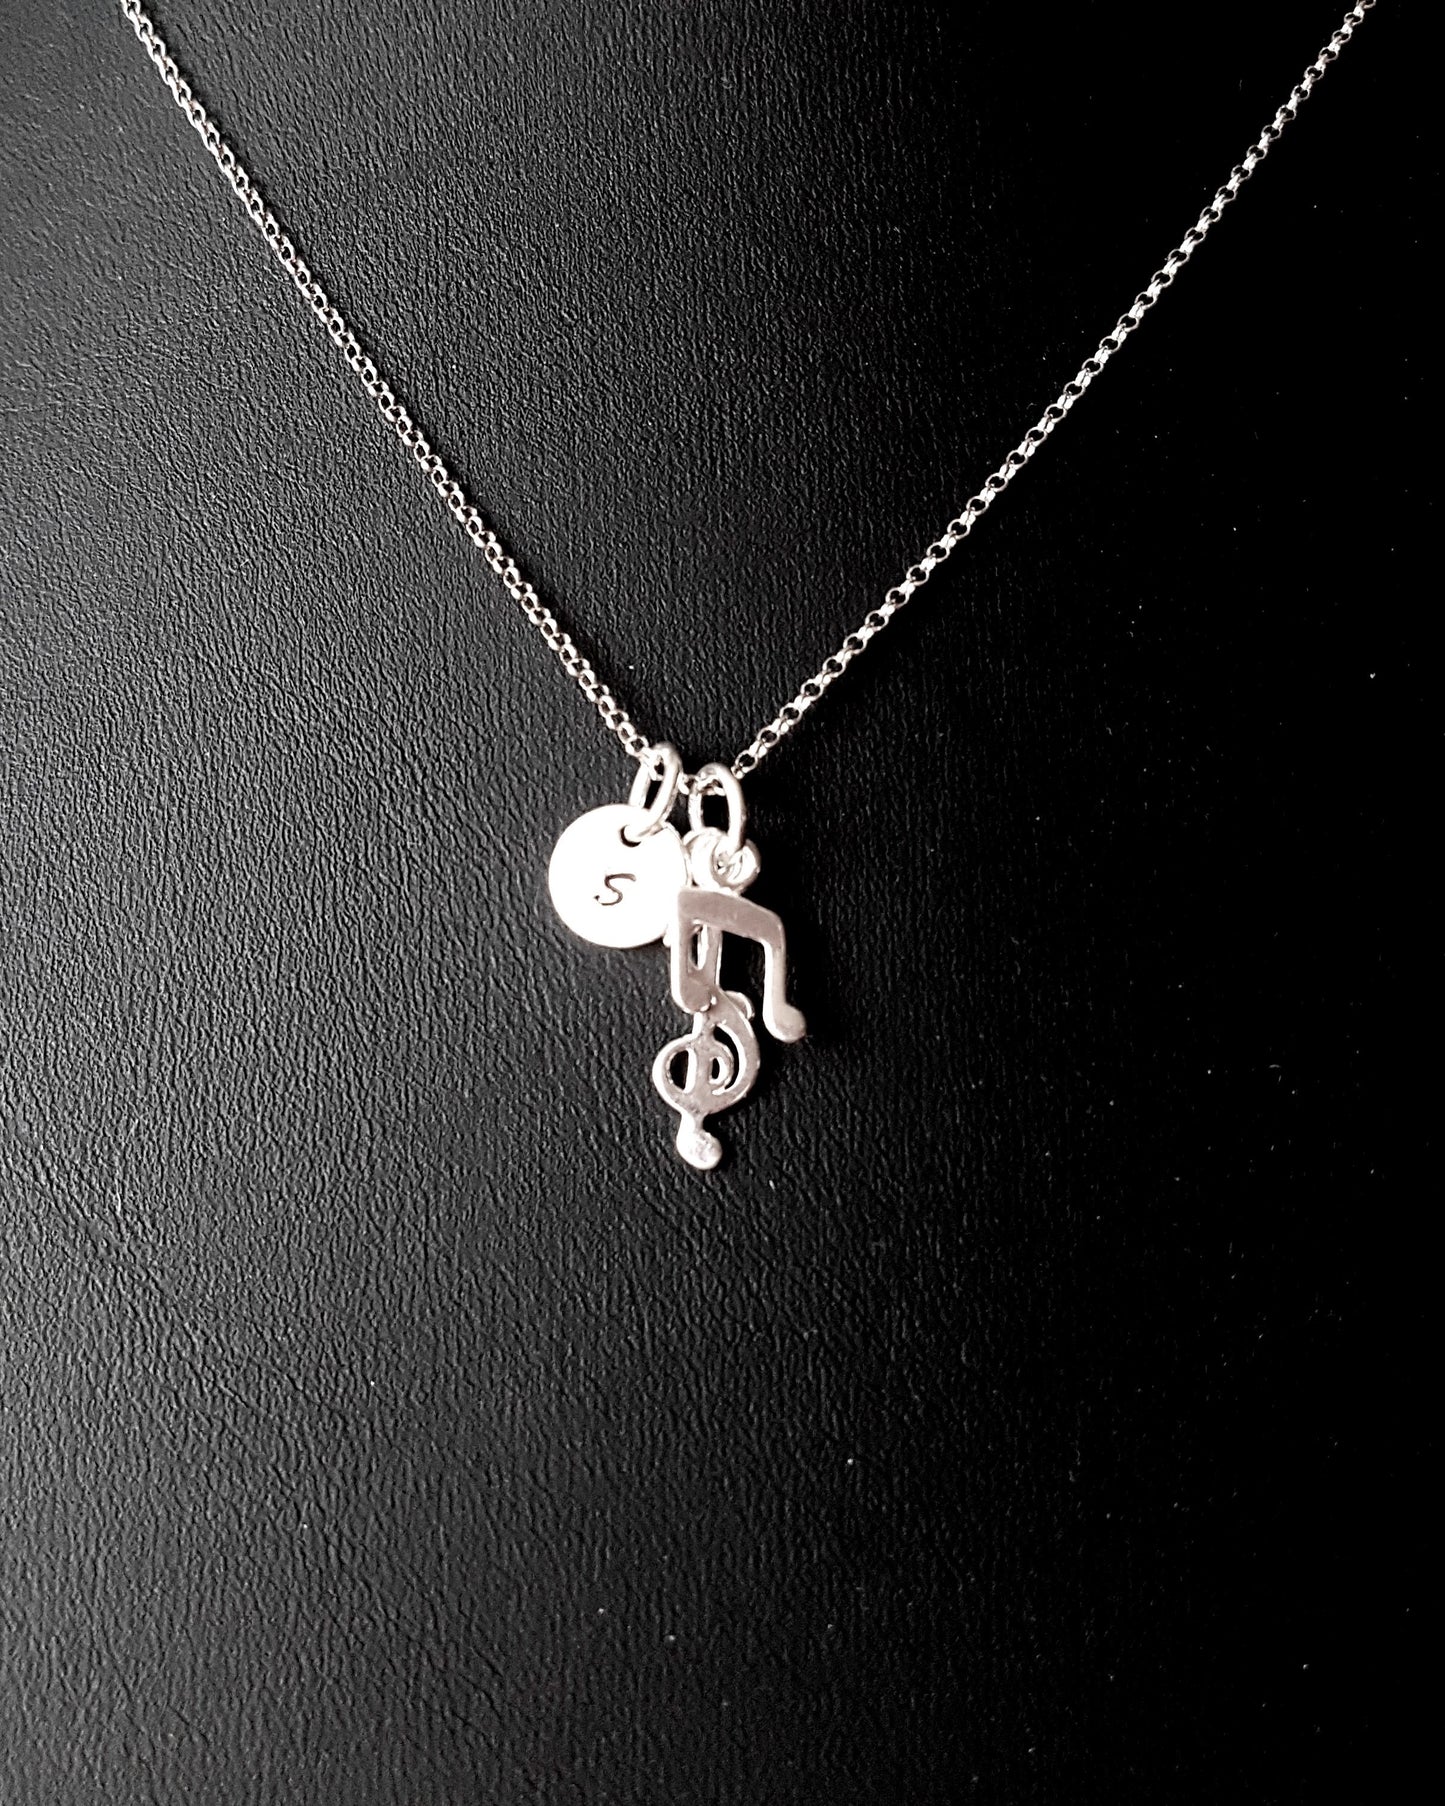 Personalized Musical Necklace, Music Symbols, Initial Pendant, Sterling Silver